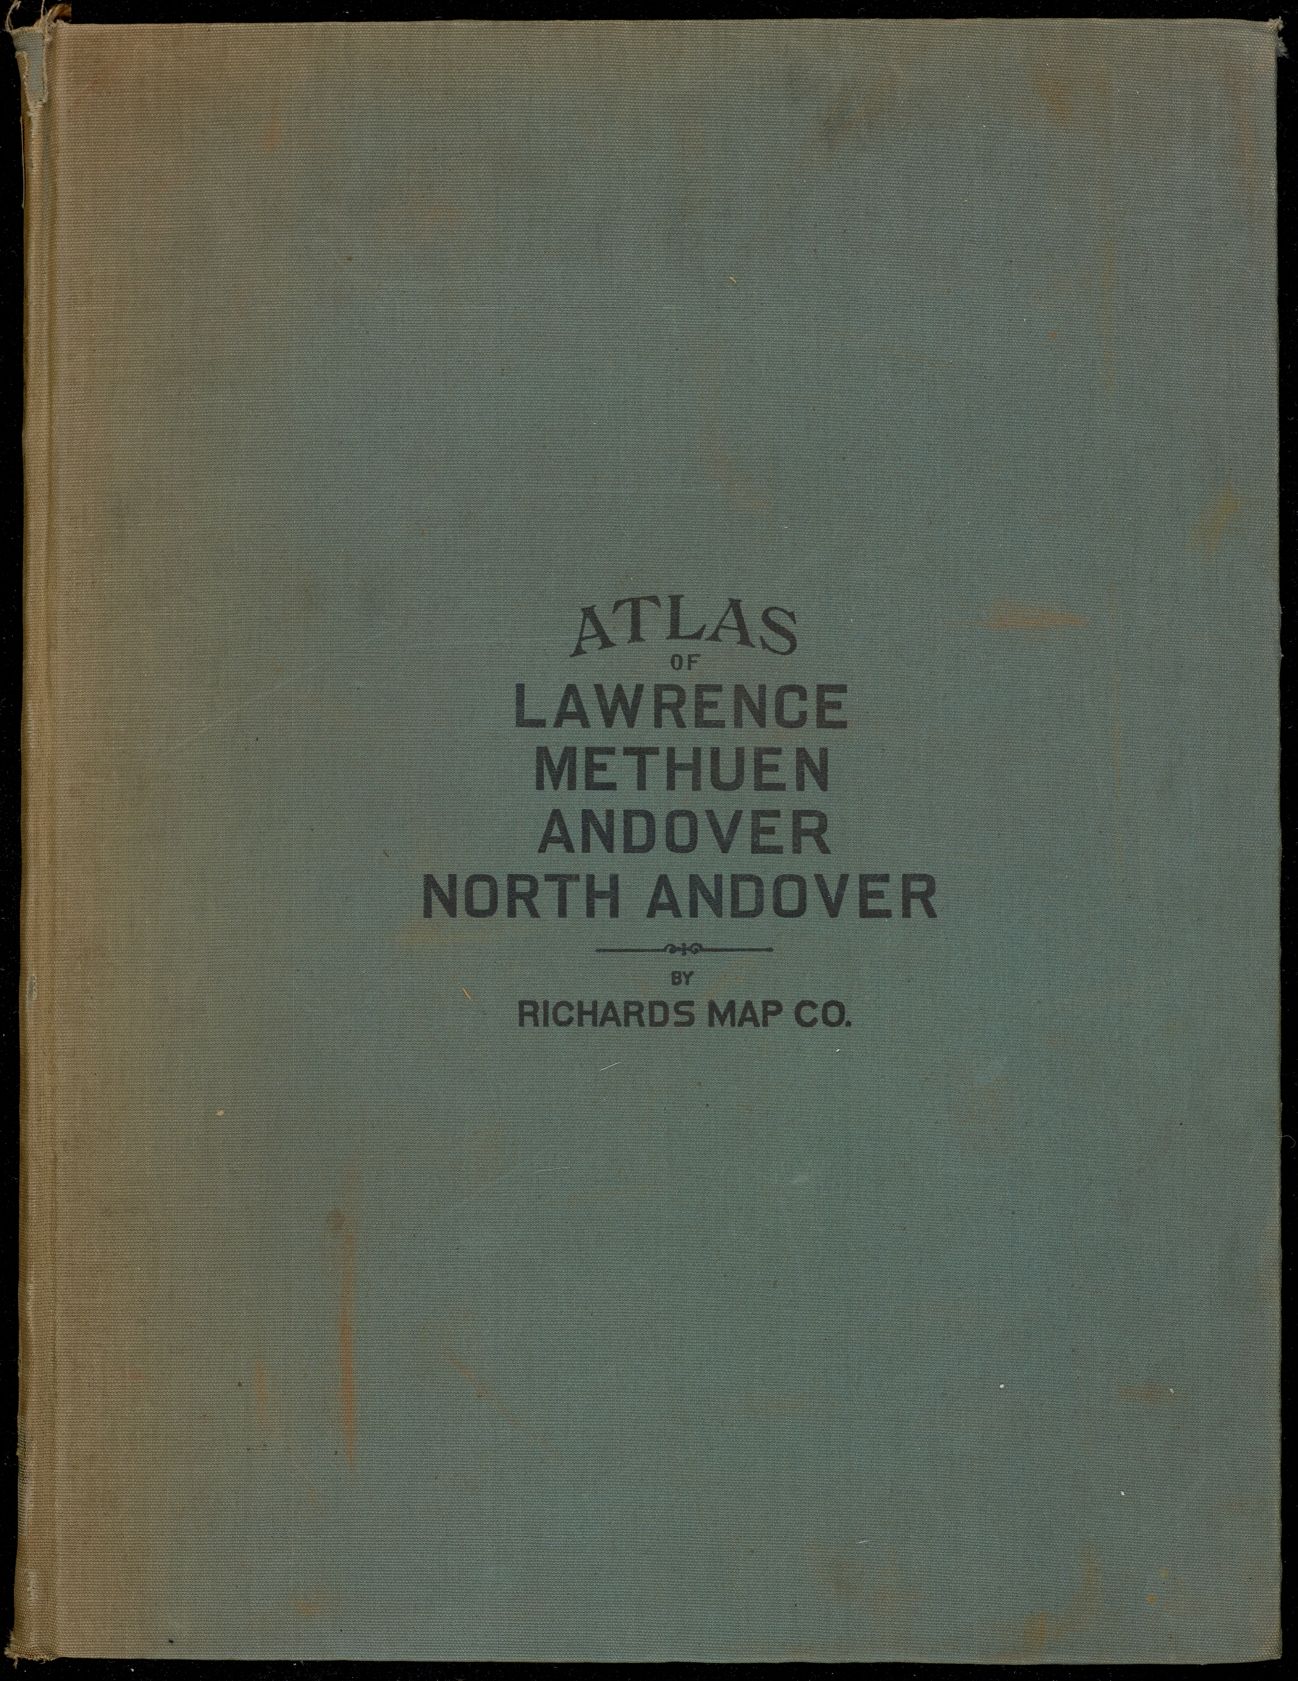 Atlas of the city of Lawrence and the towns of Methuen, Andover and North Andover, Massachusetts